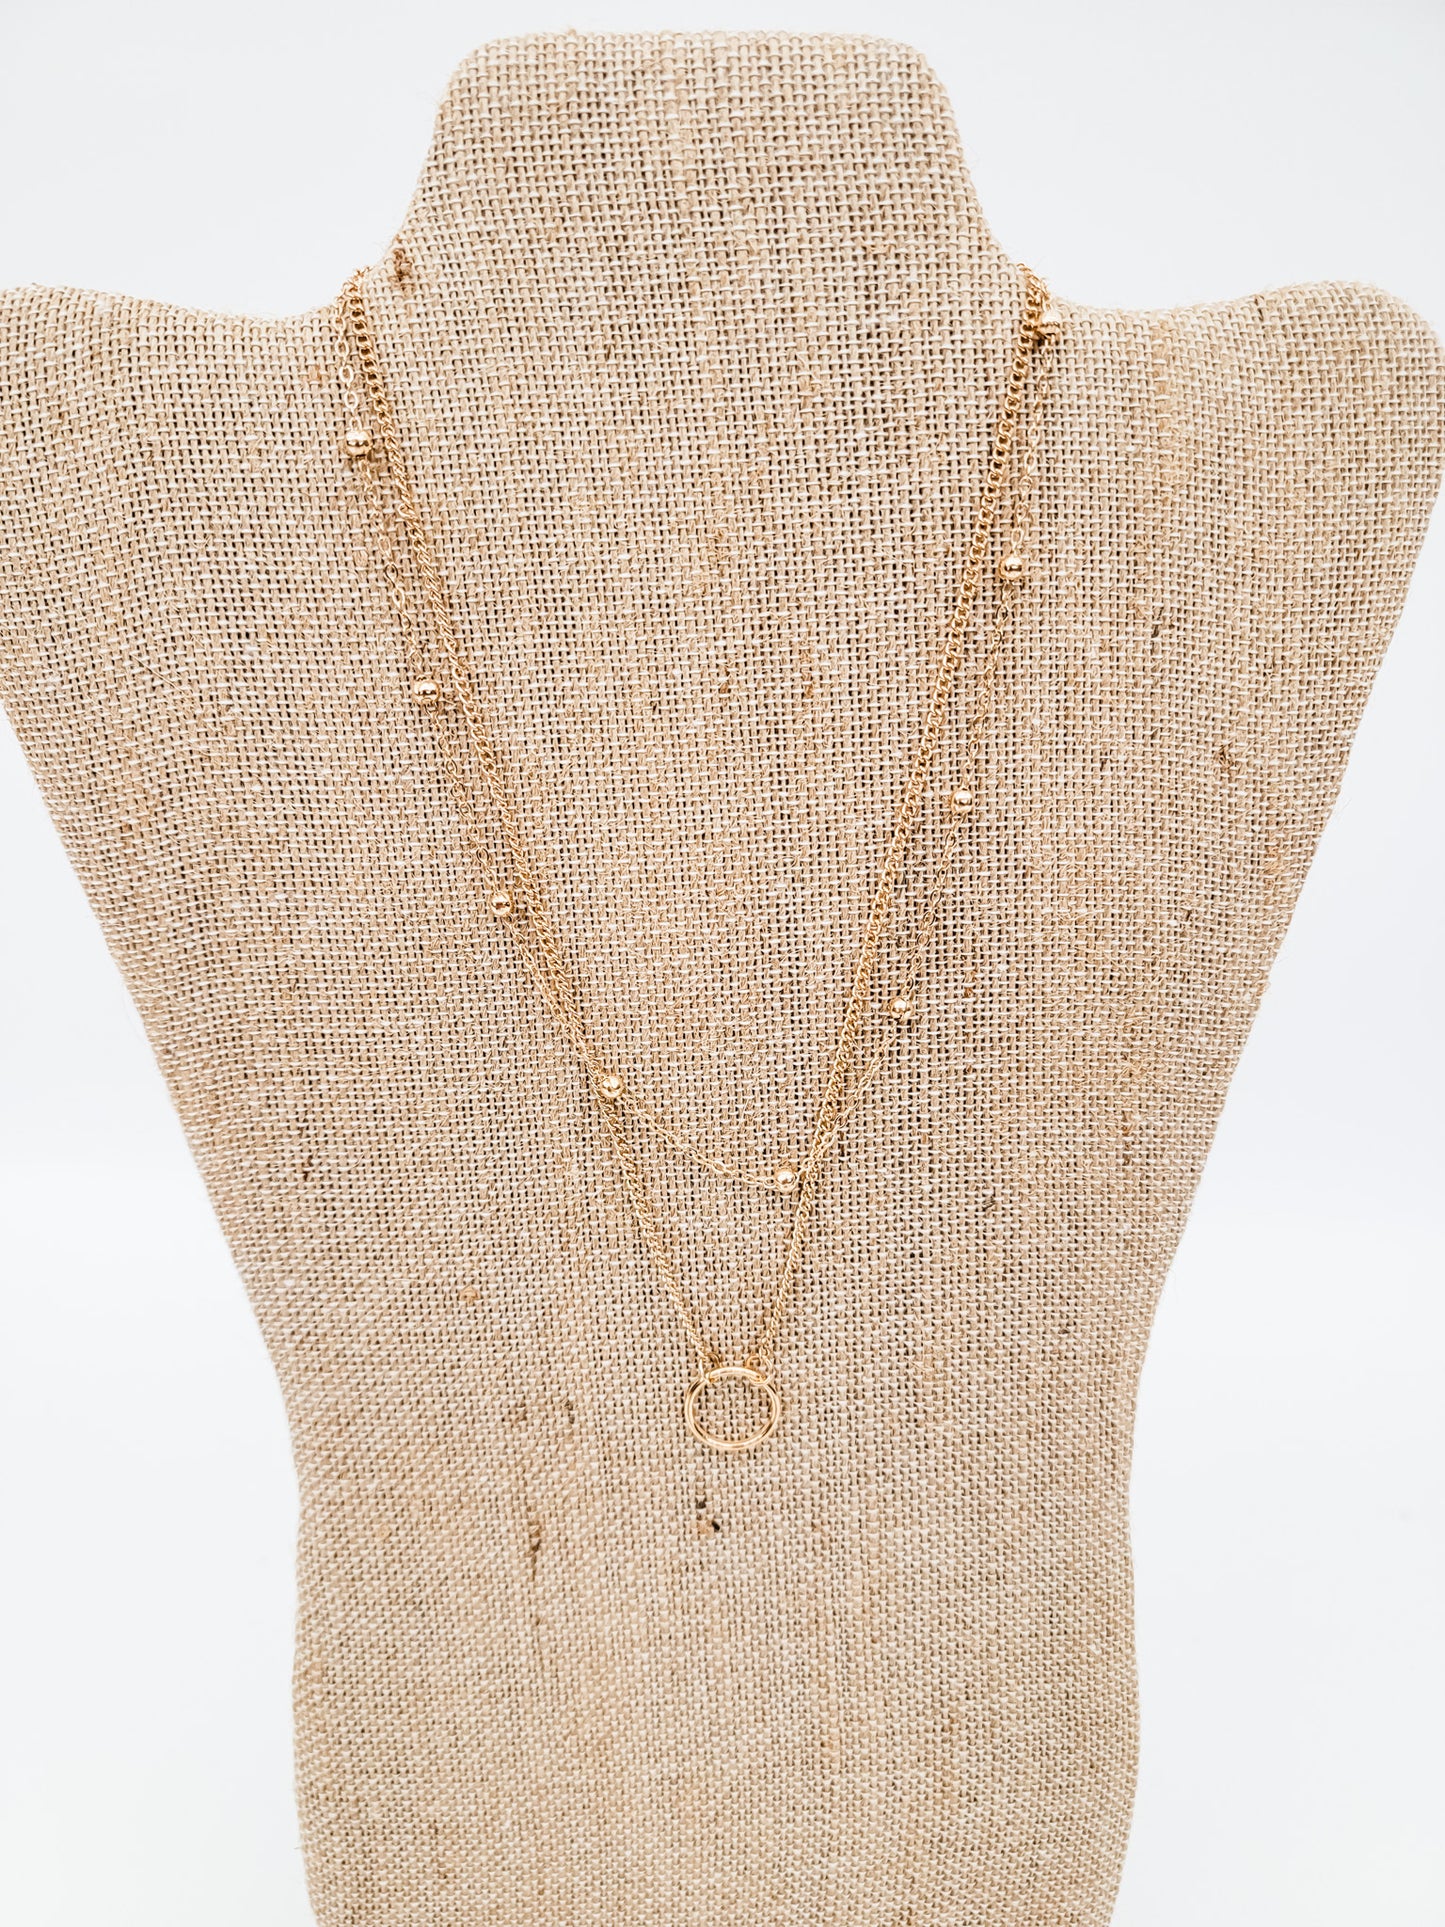 Simple, Gold Chain Necklaces - Variety